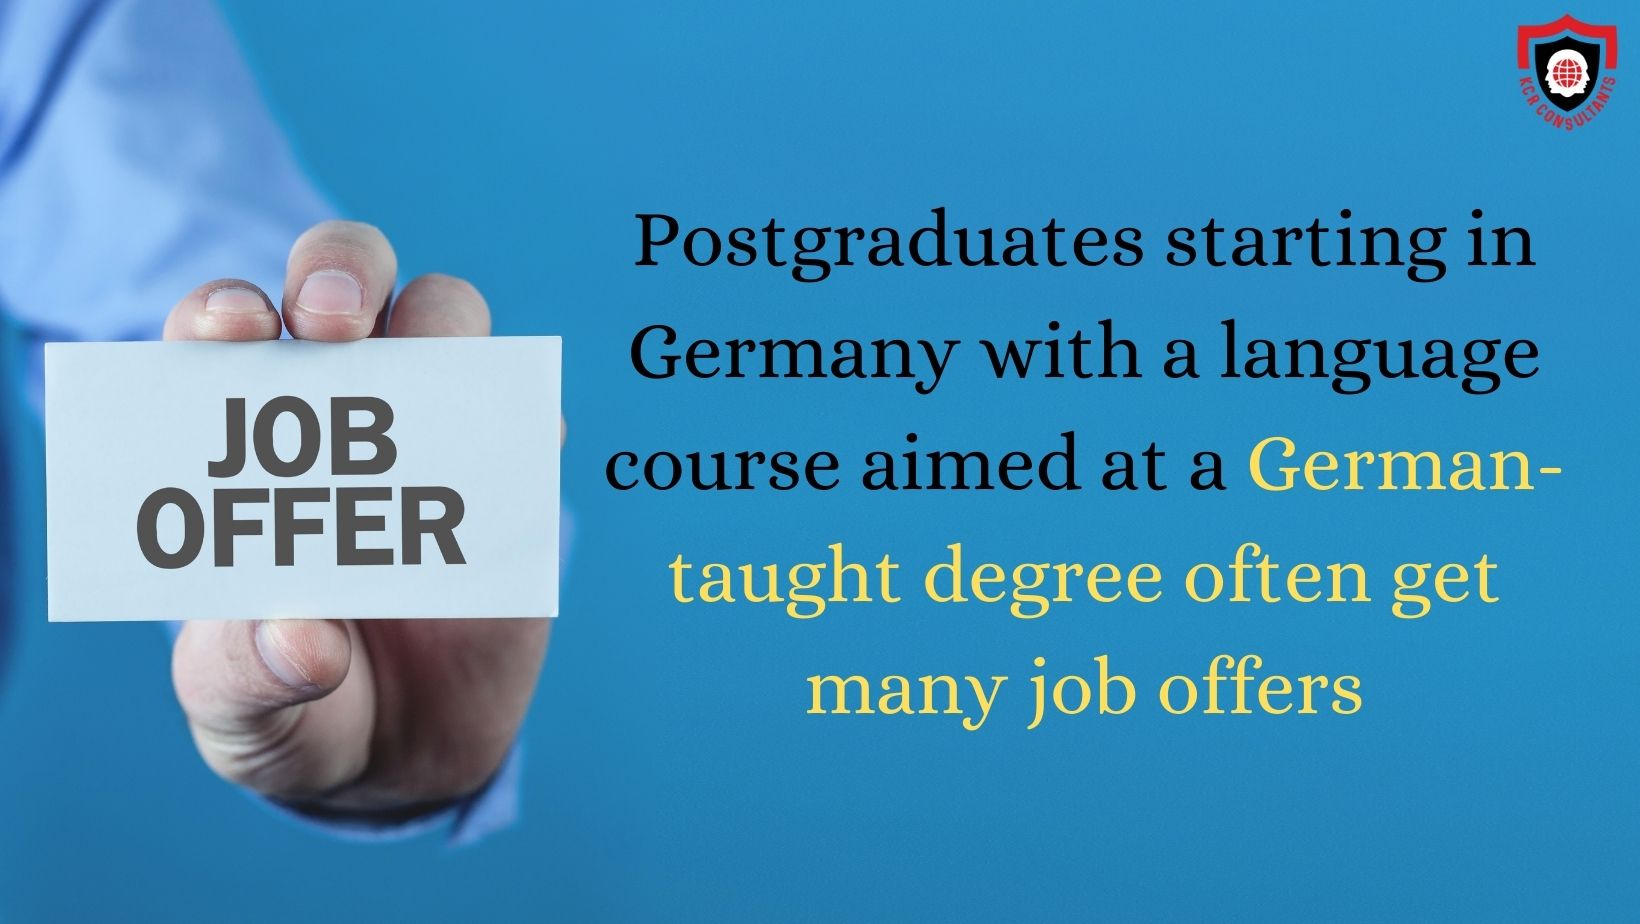 STUDY IN GERMANY - KCR CONSULTANTS - German-taught degree - job offers